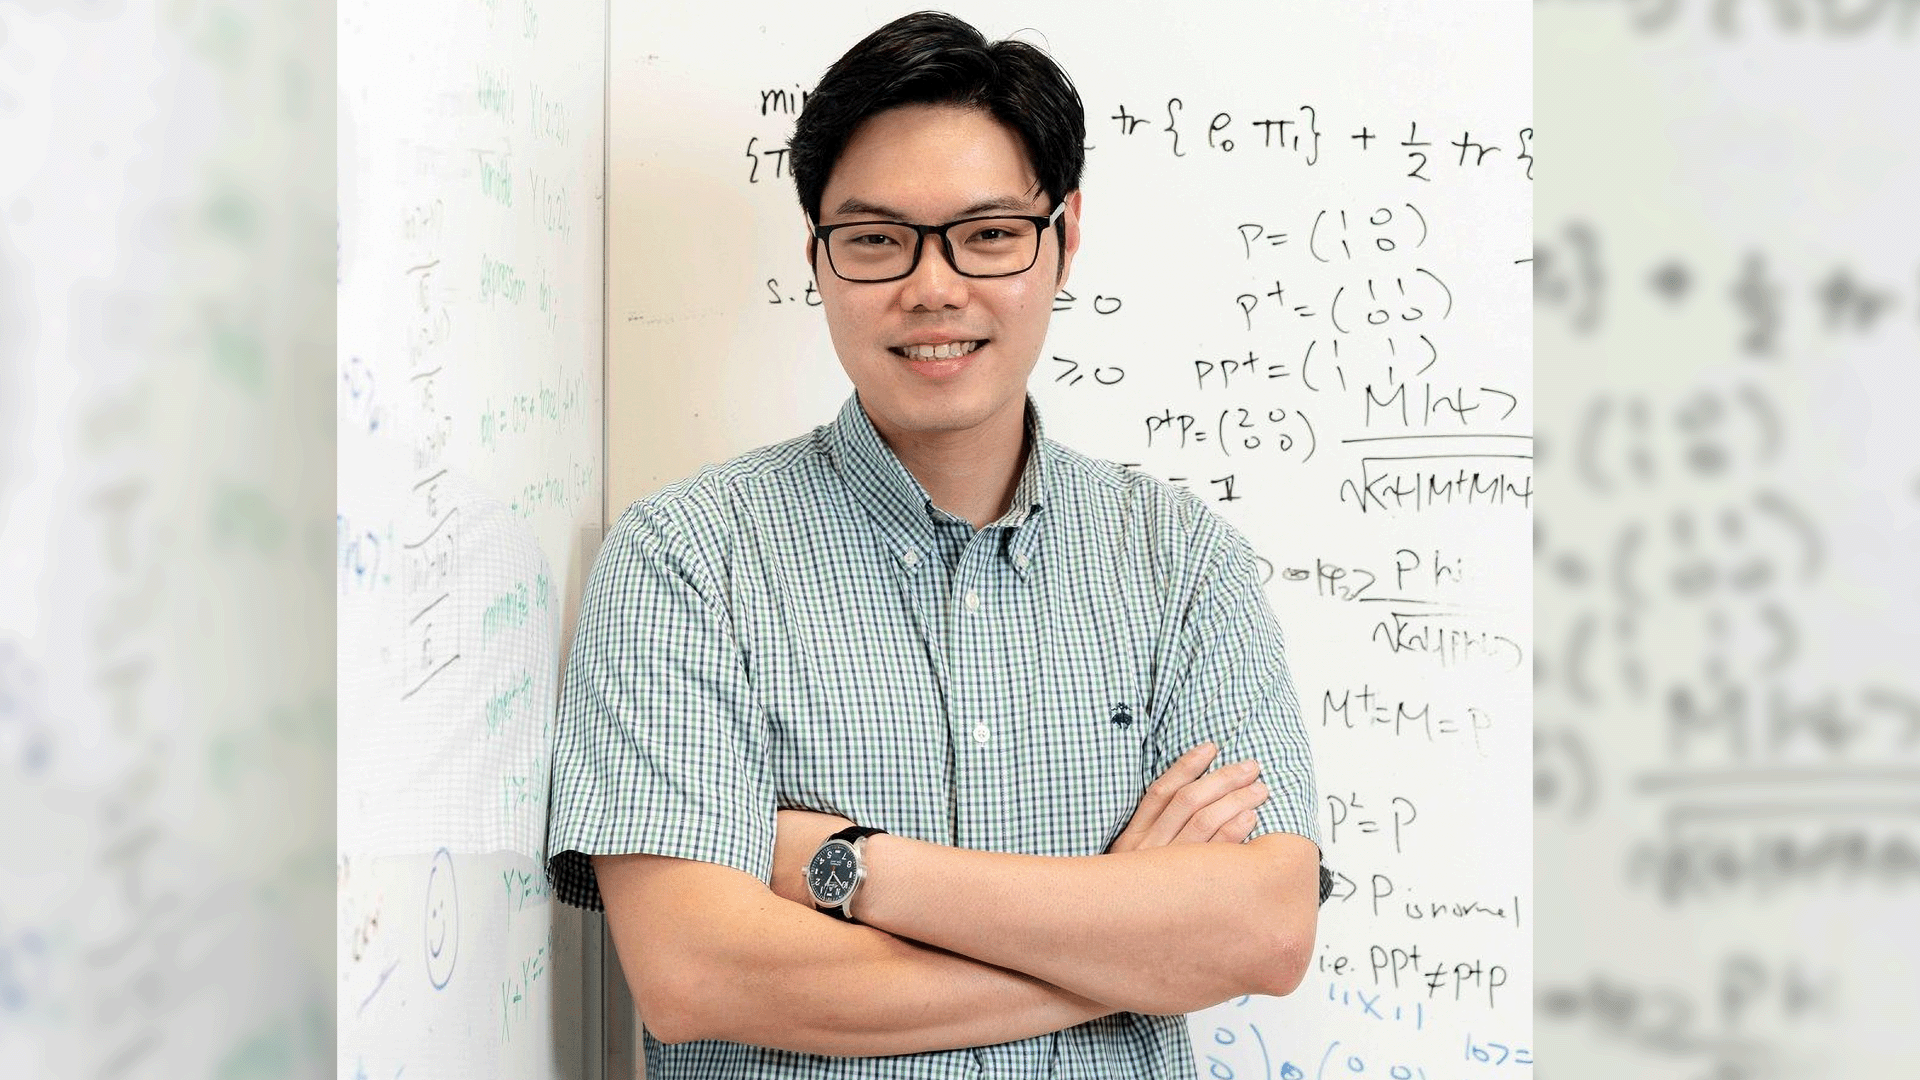 NUS Assistant Professor Charles Lim oversaw the project’s theoretical development